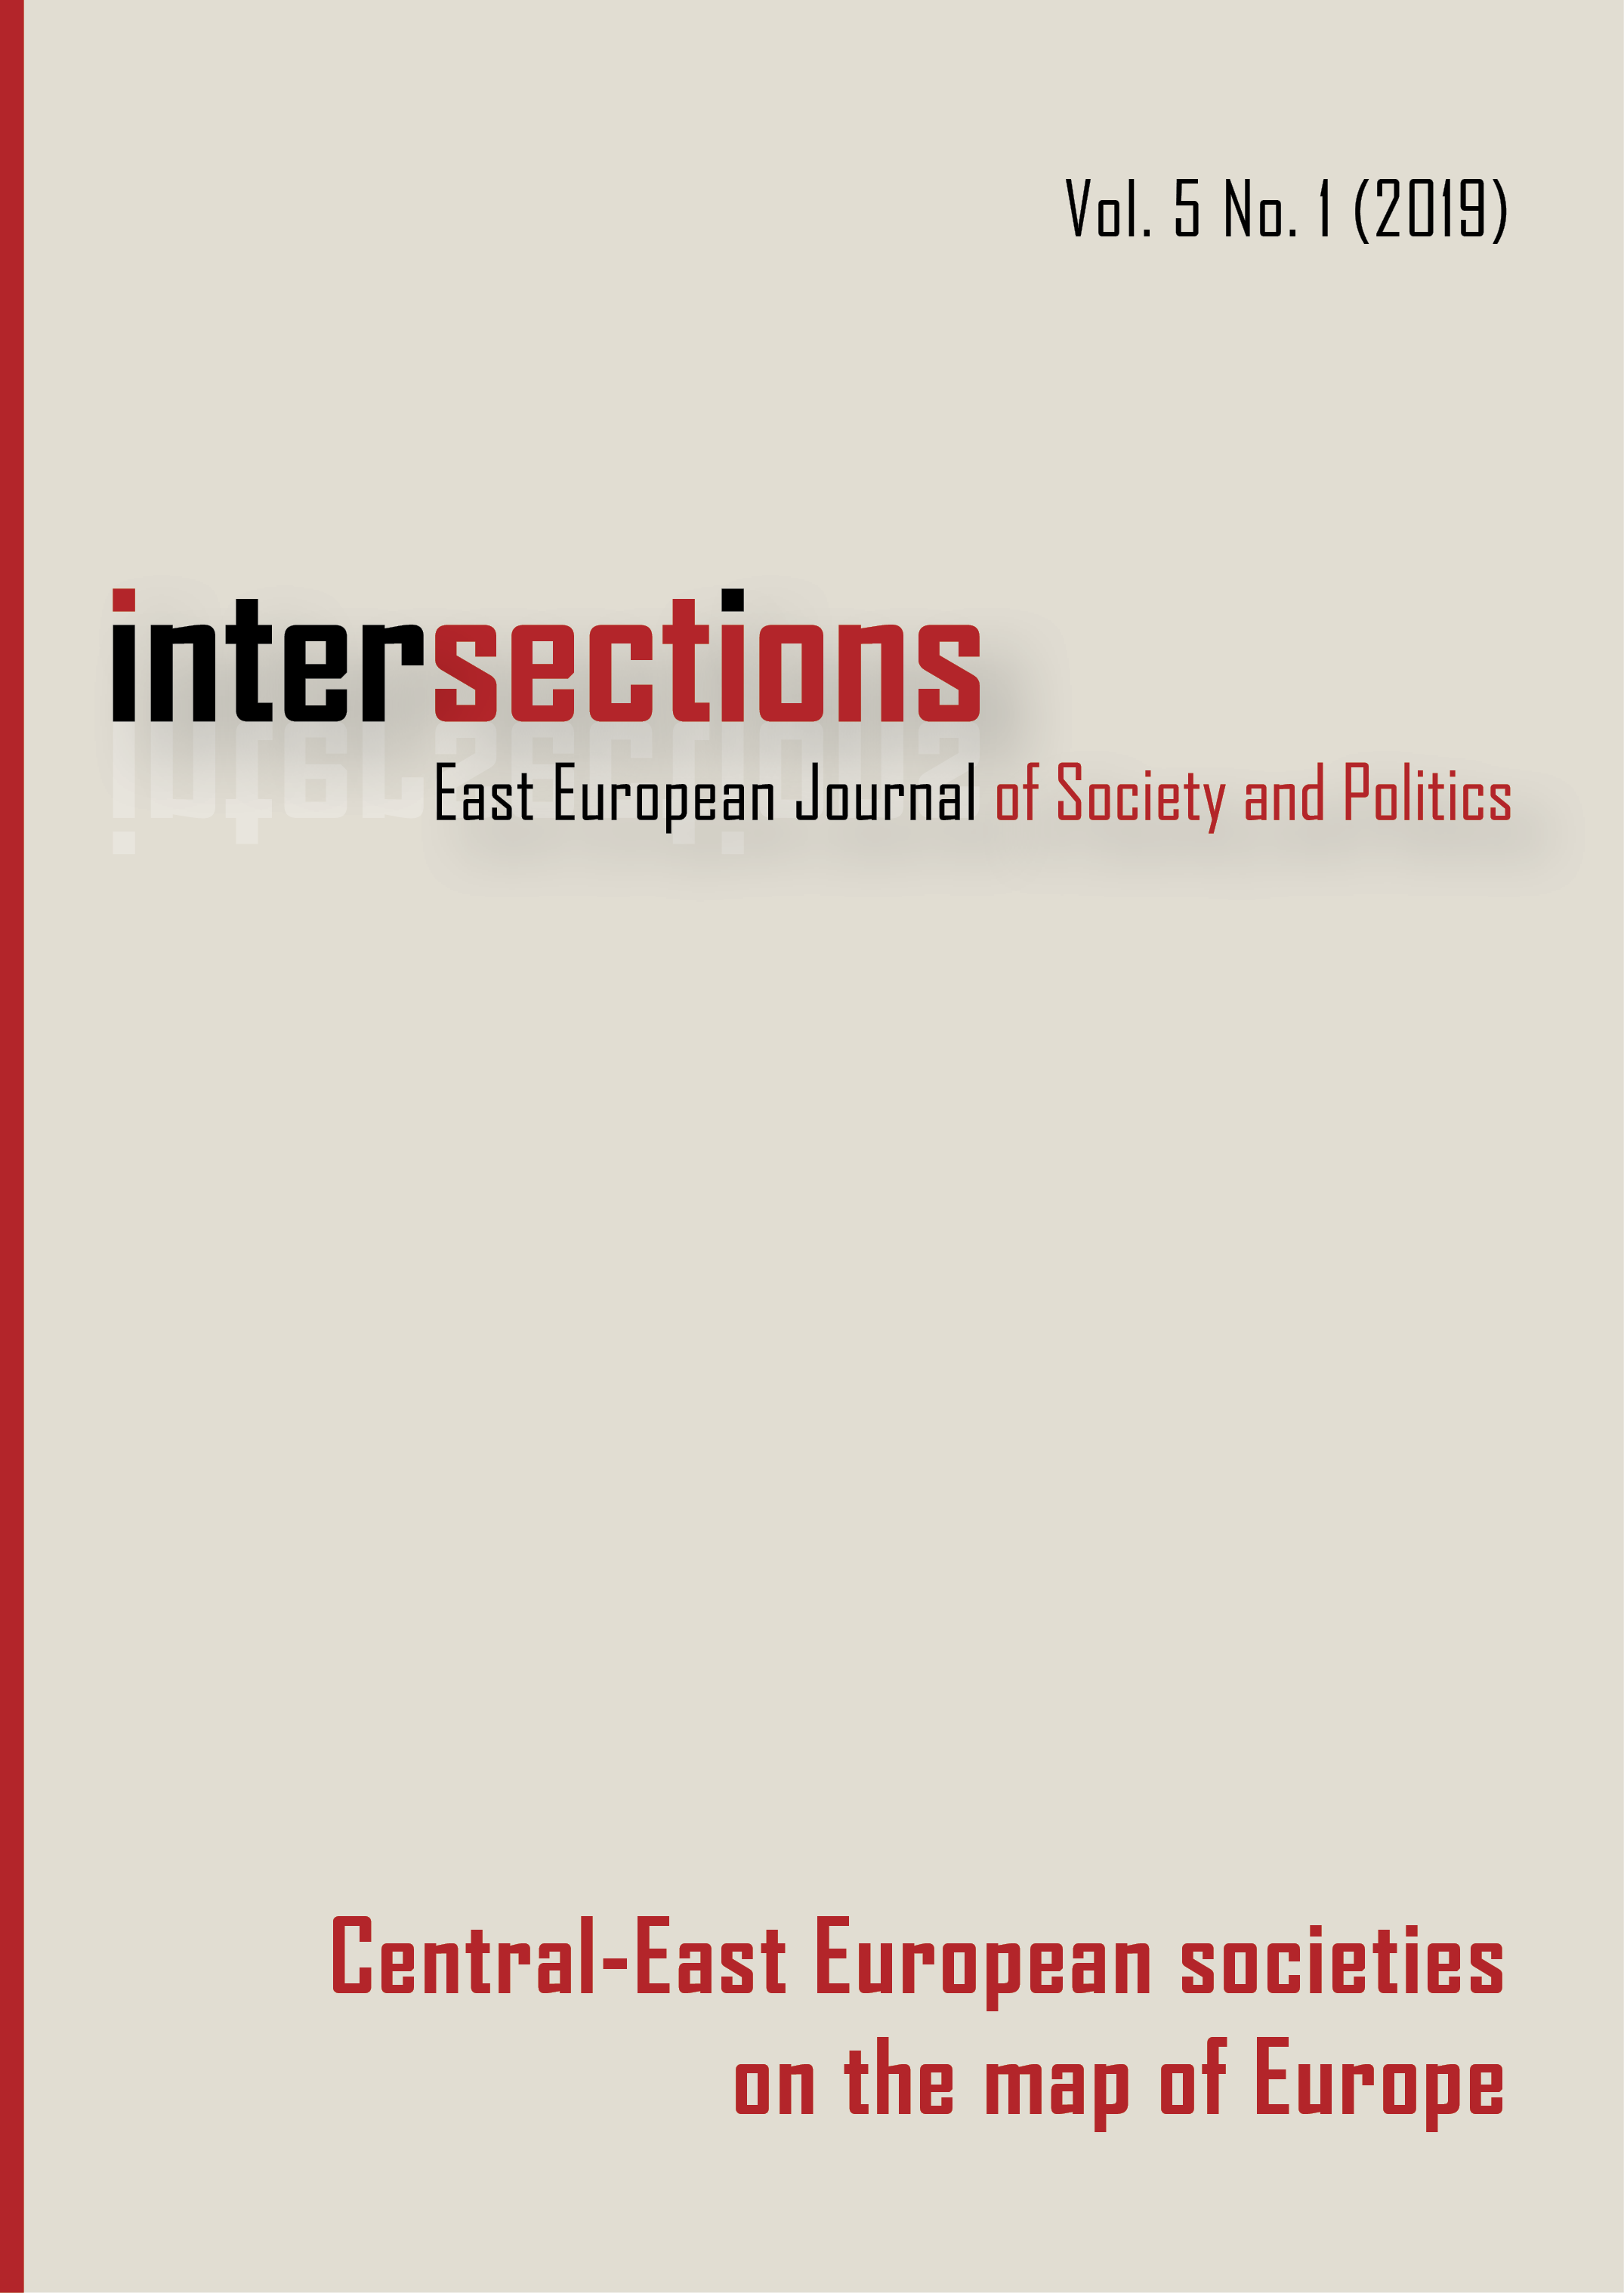 					View Vol. 5 No. 1 (2019): Central-East European societies on the map of Europe
				